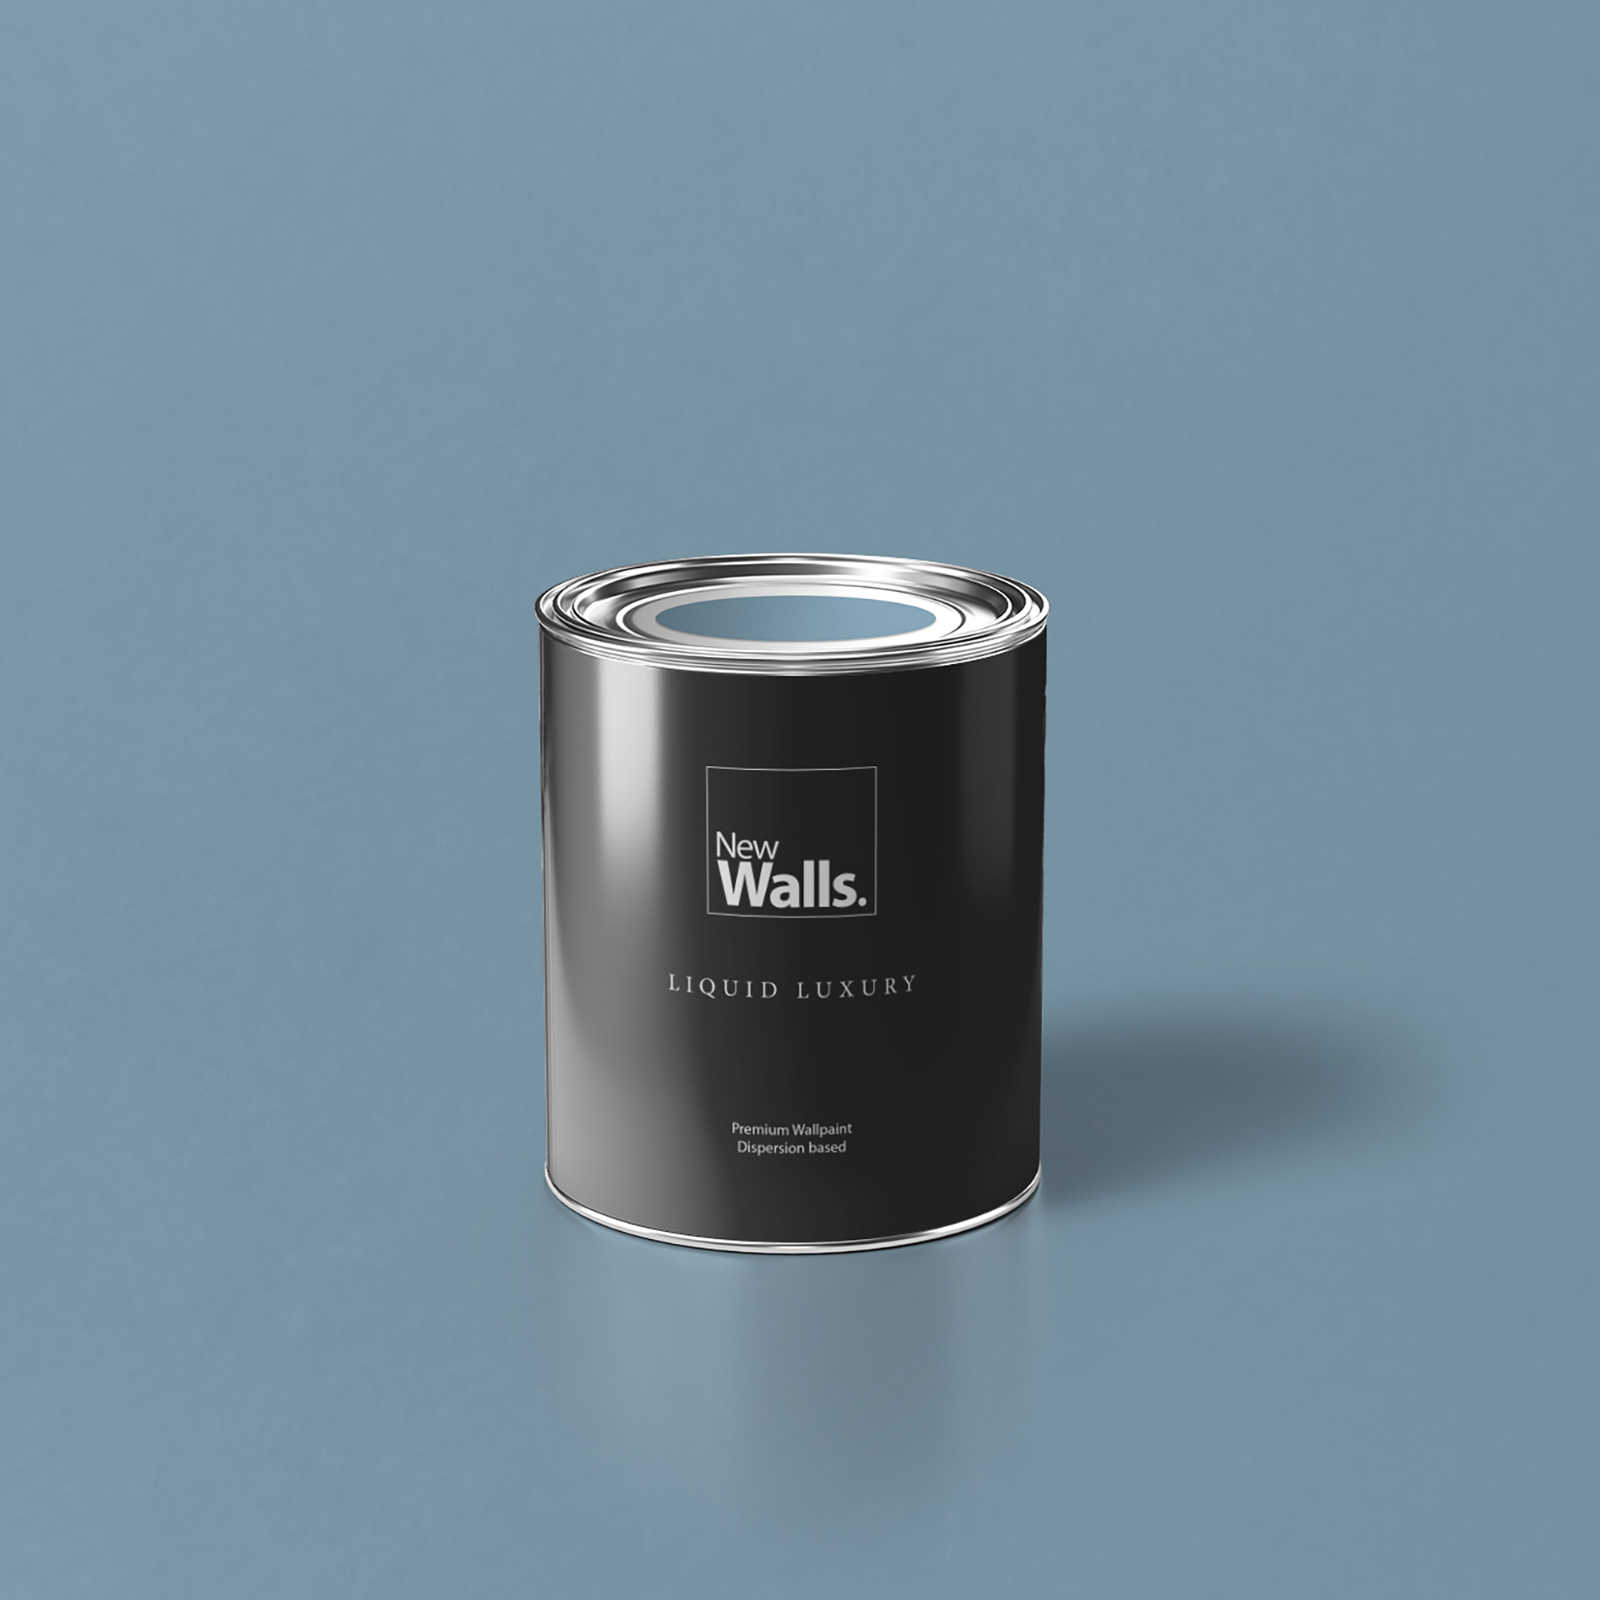         Premium Wall Paint Serene Nordic Blue »Blissful Blue« NW306 – 1 litre
    